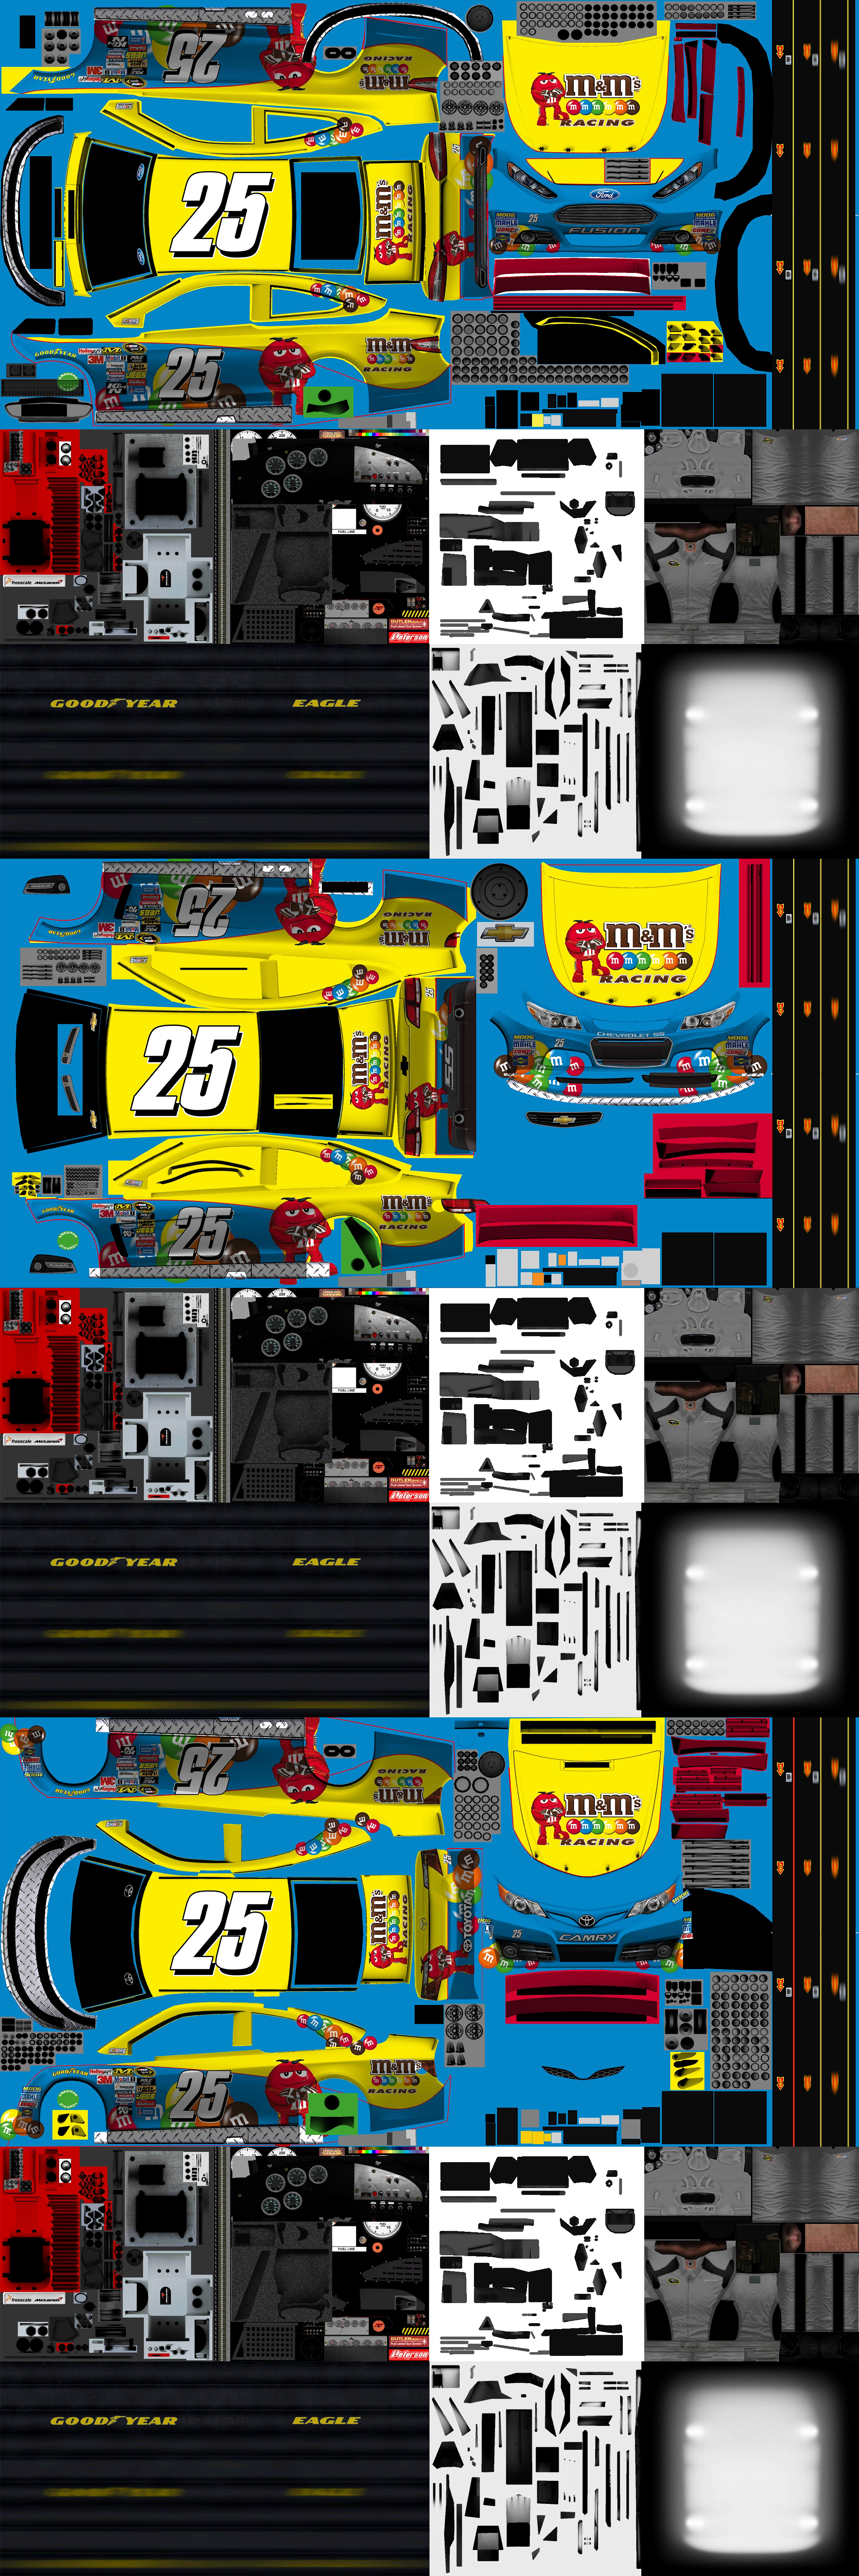 NASCAR Manager - M&M's